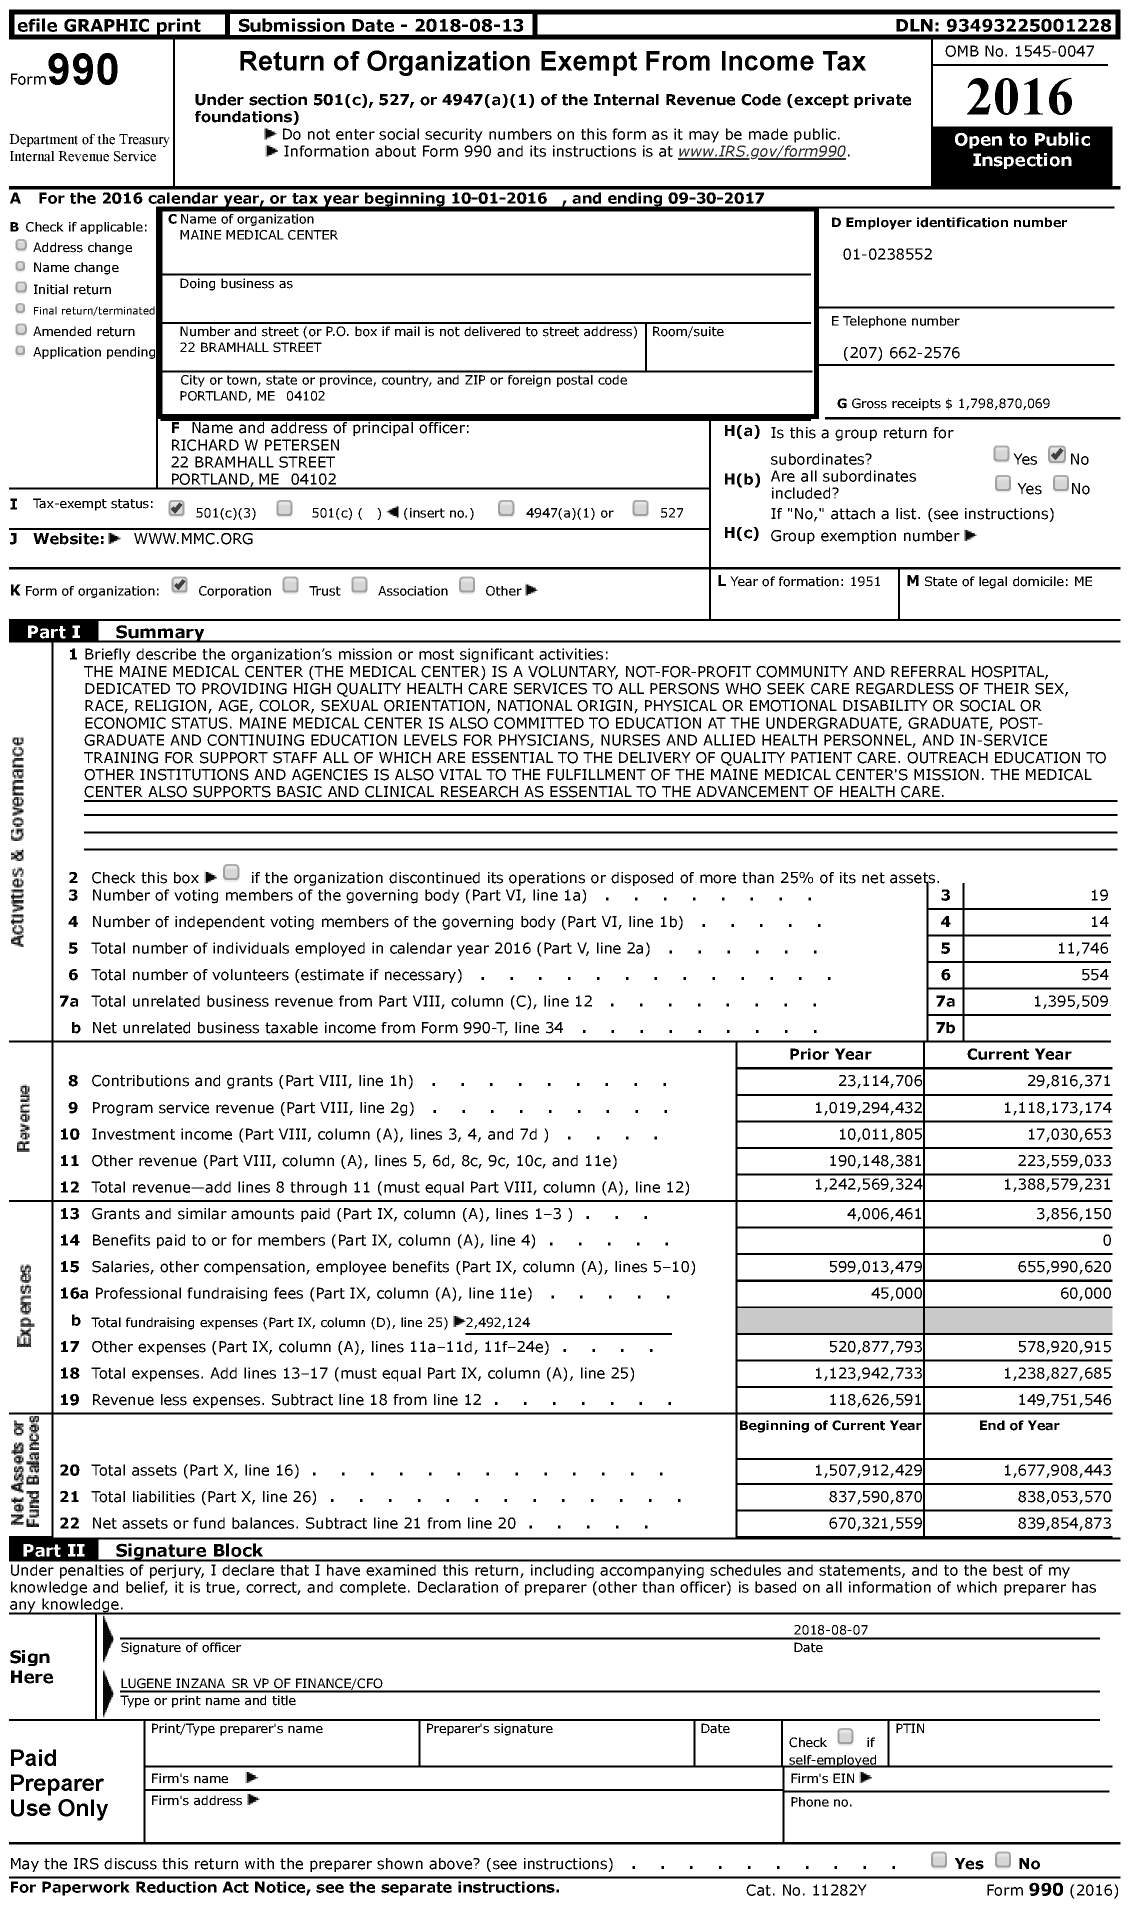 Image of first page of 2016 Form 990 for MaineHealth (MMC)